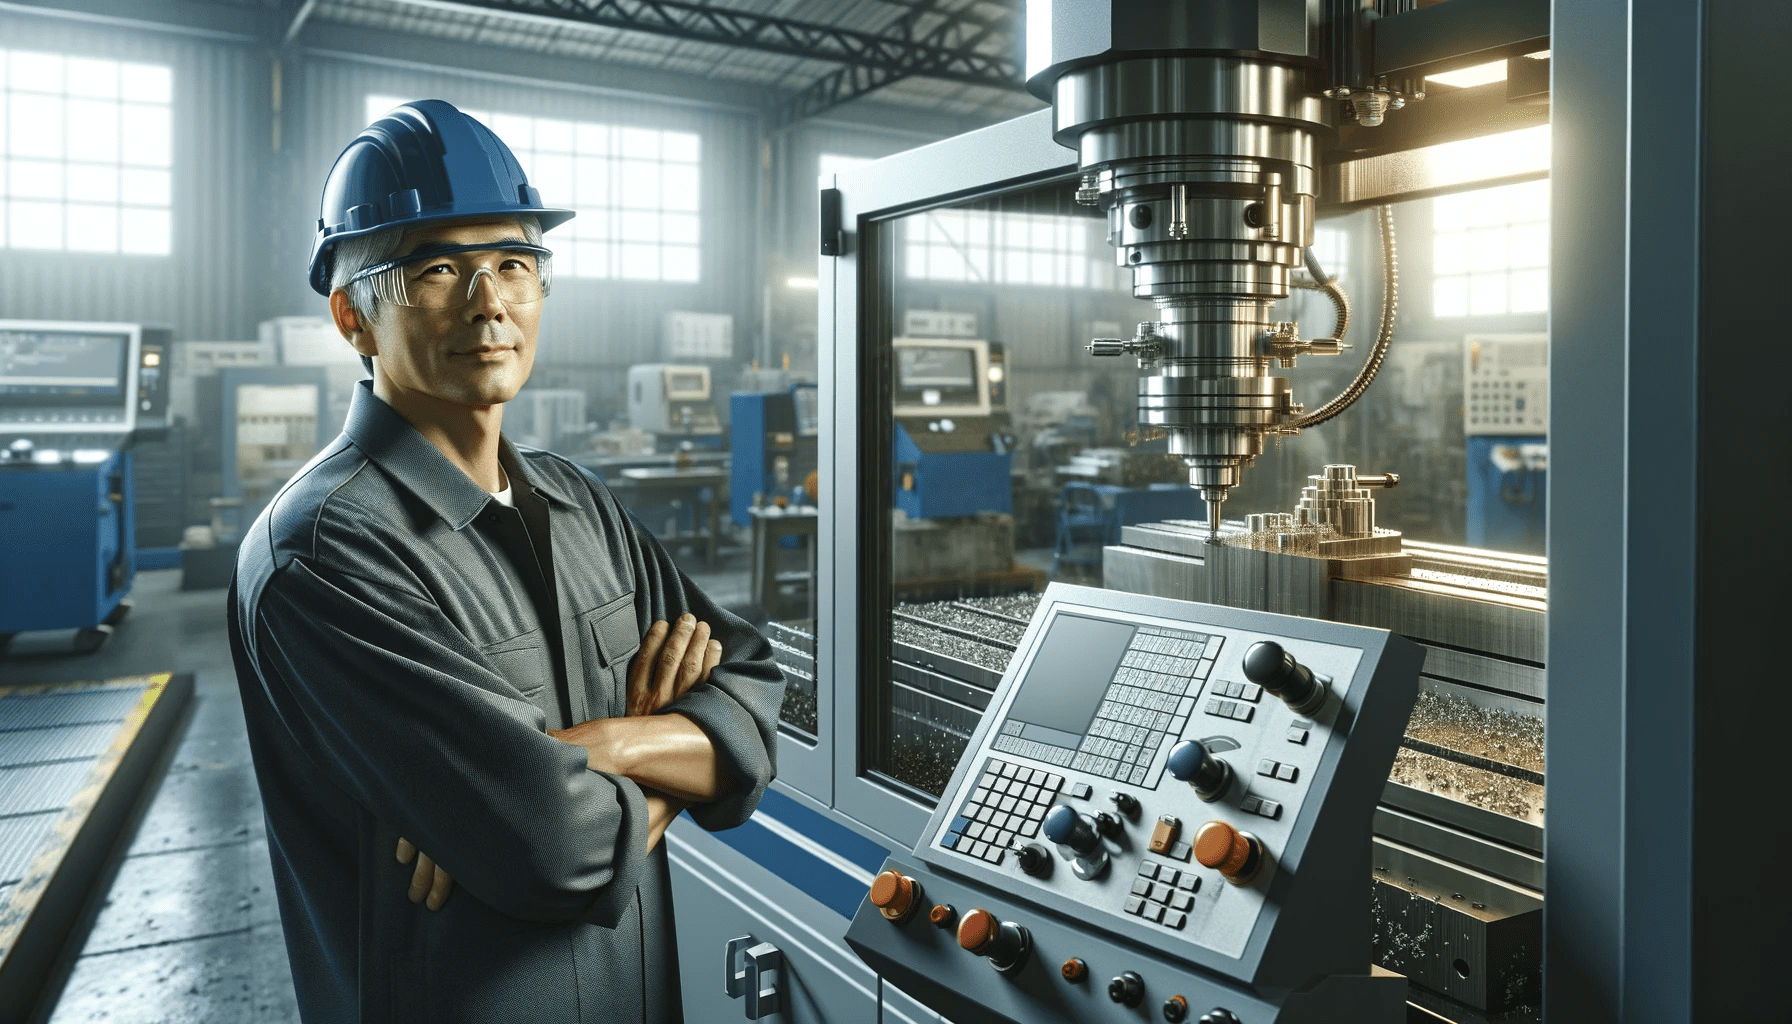 CNC machinist in a CNC workshop environment. The machinist is a middle-aged, Asian male, wearing safety goggles, a hard hat, an